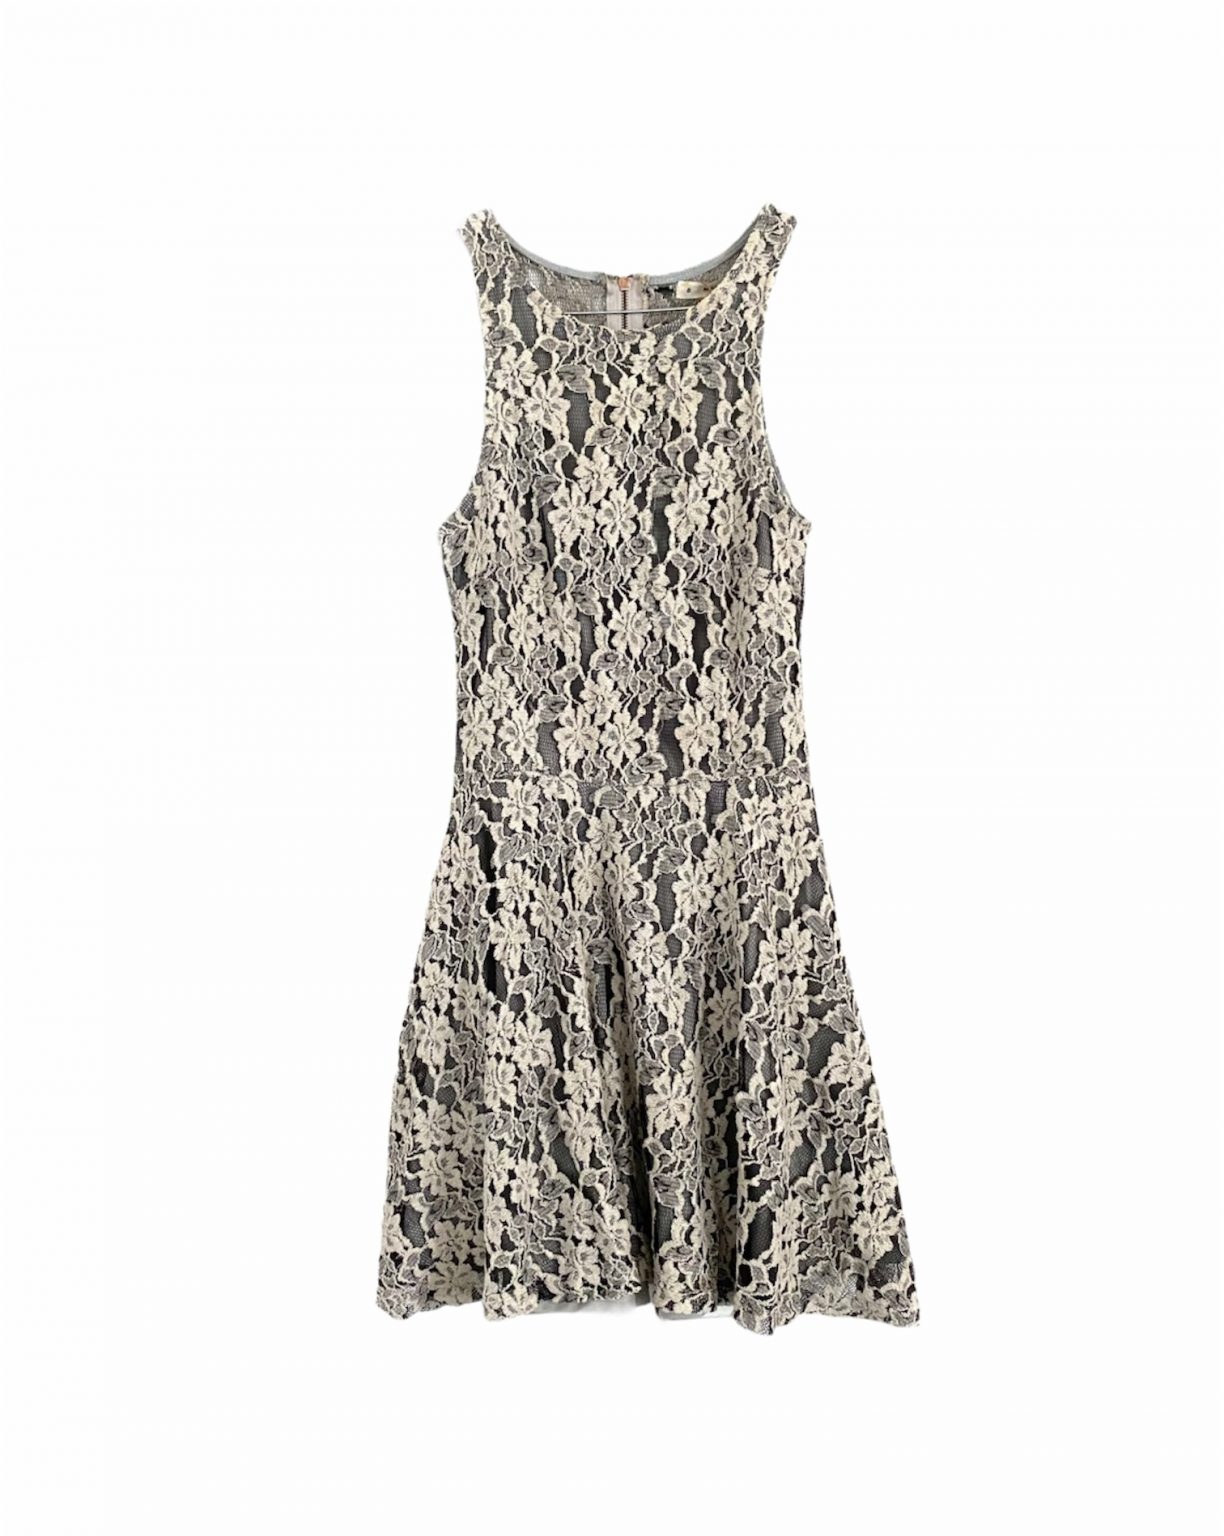 Mika & Gala Textured Lace Dress - Size 8 - The Re: Club